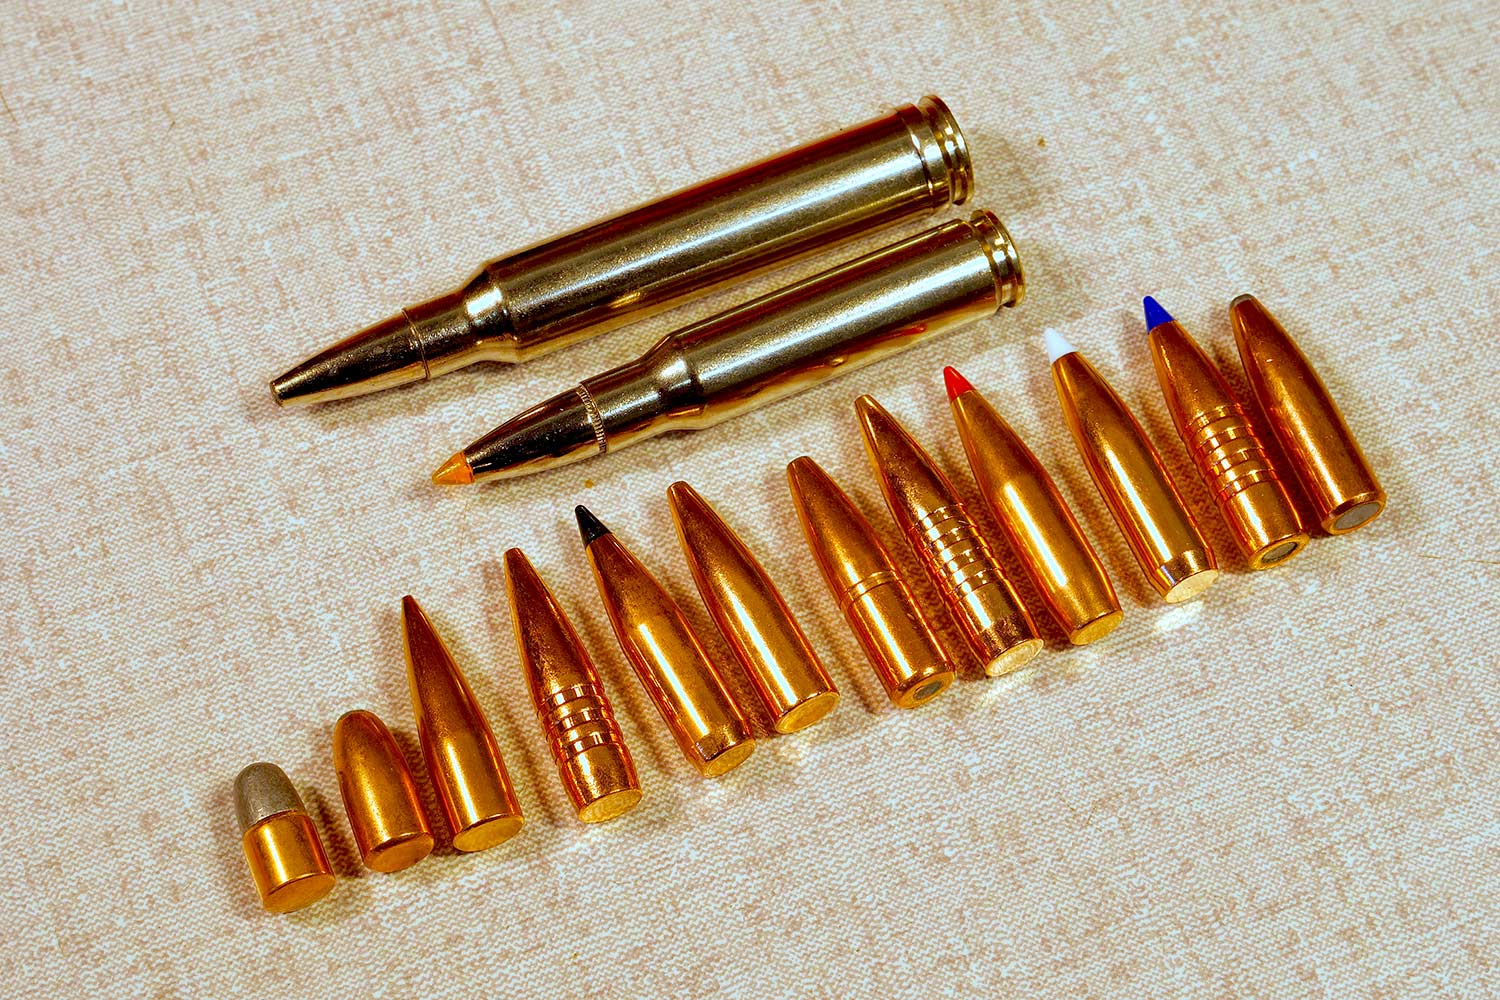 A lineup of ammo used in Africa safari hunting.